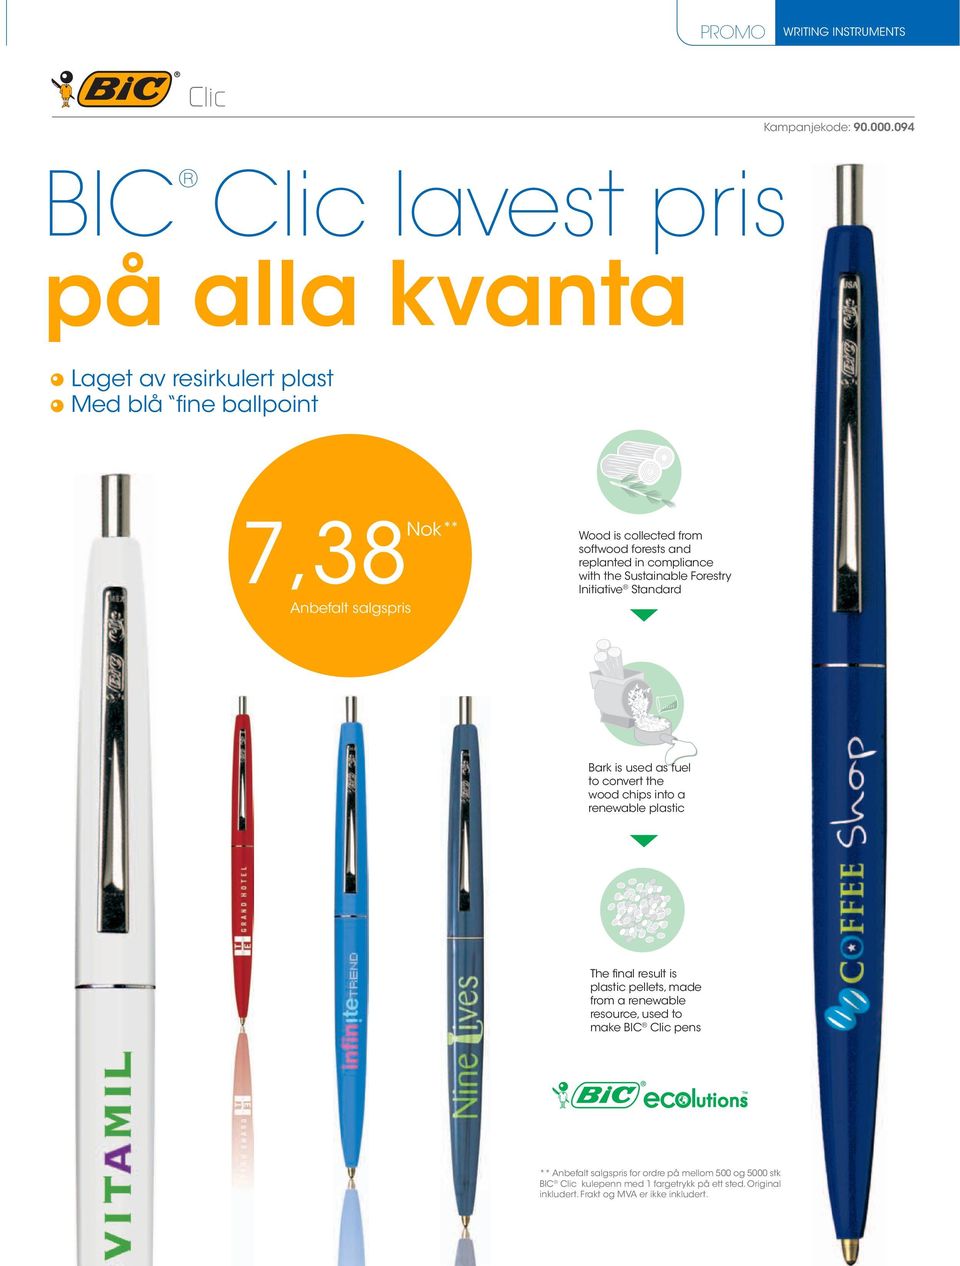 to convert the wood chips into a renewable plastic The final result is plastic pellets, made from a renewable resource, used to make BIC Clic pens